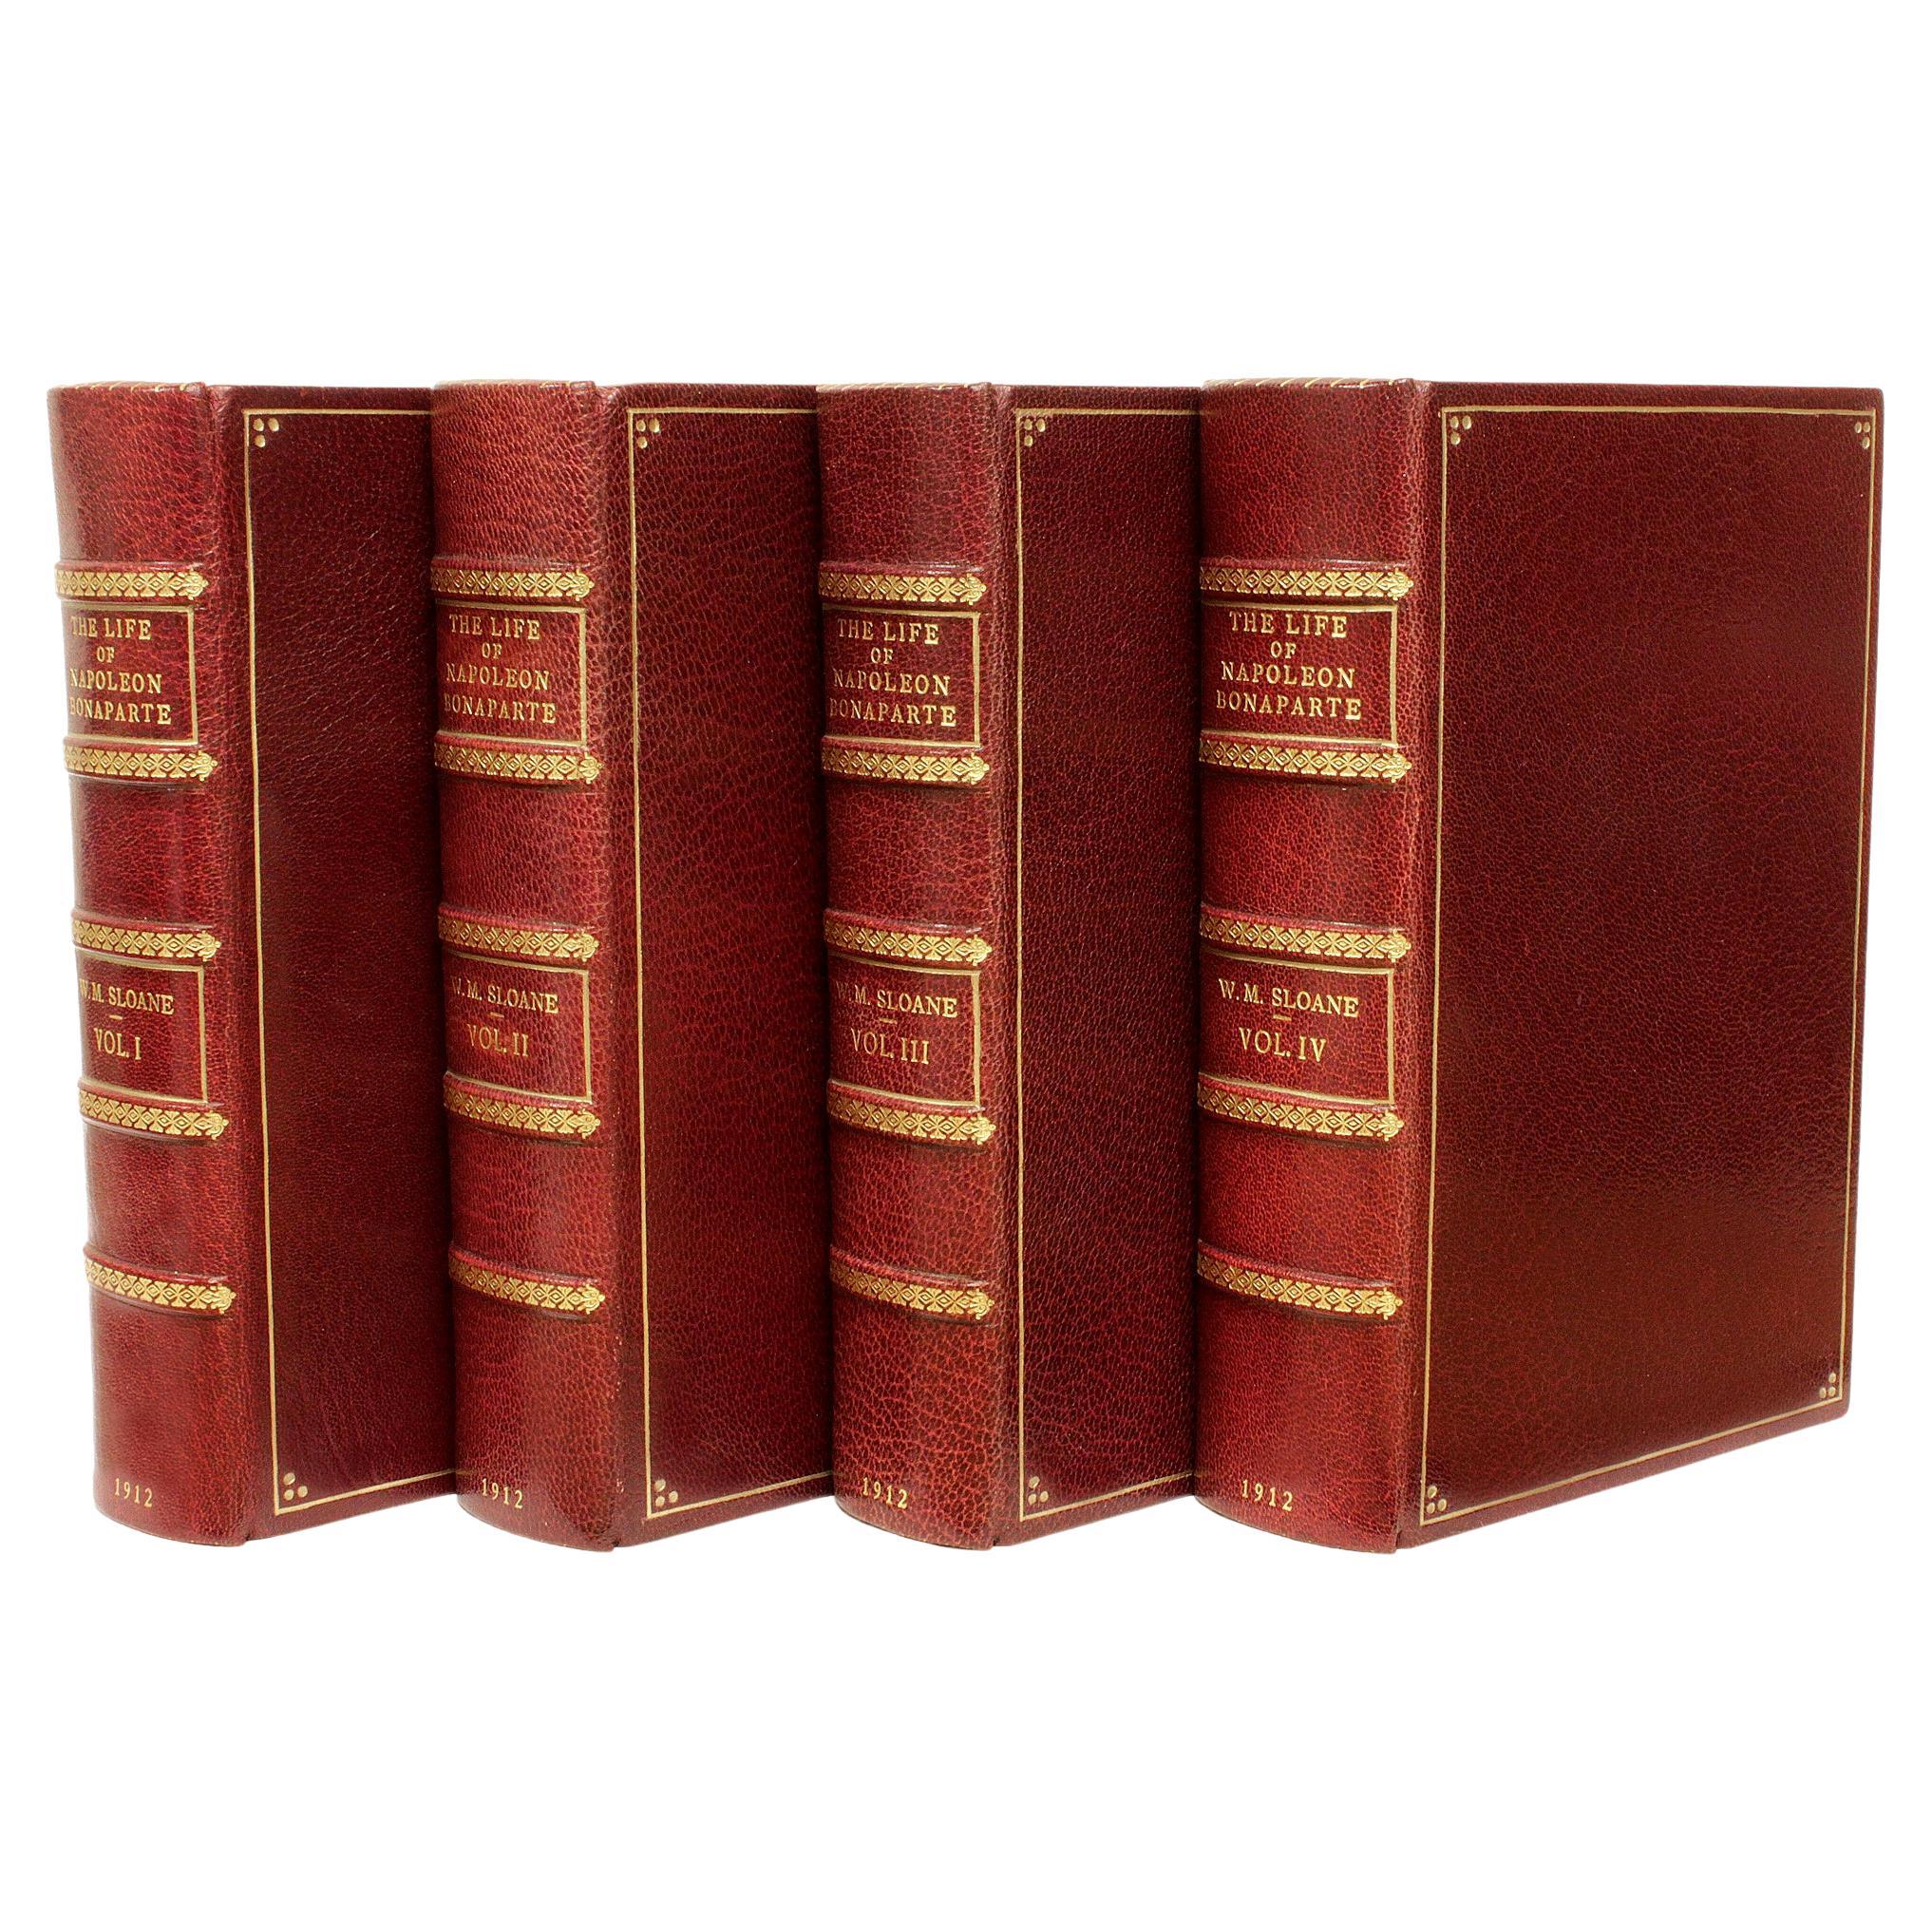 Sloane, the Life of Napoleon Bonaparte, New Revised Edition, in a Fine Binding For Sale